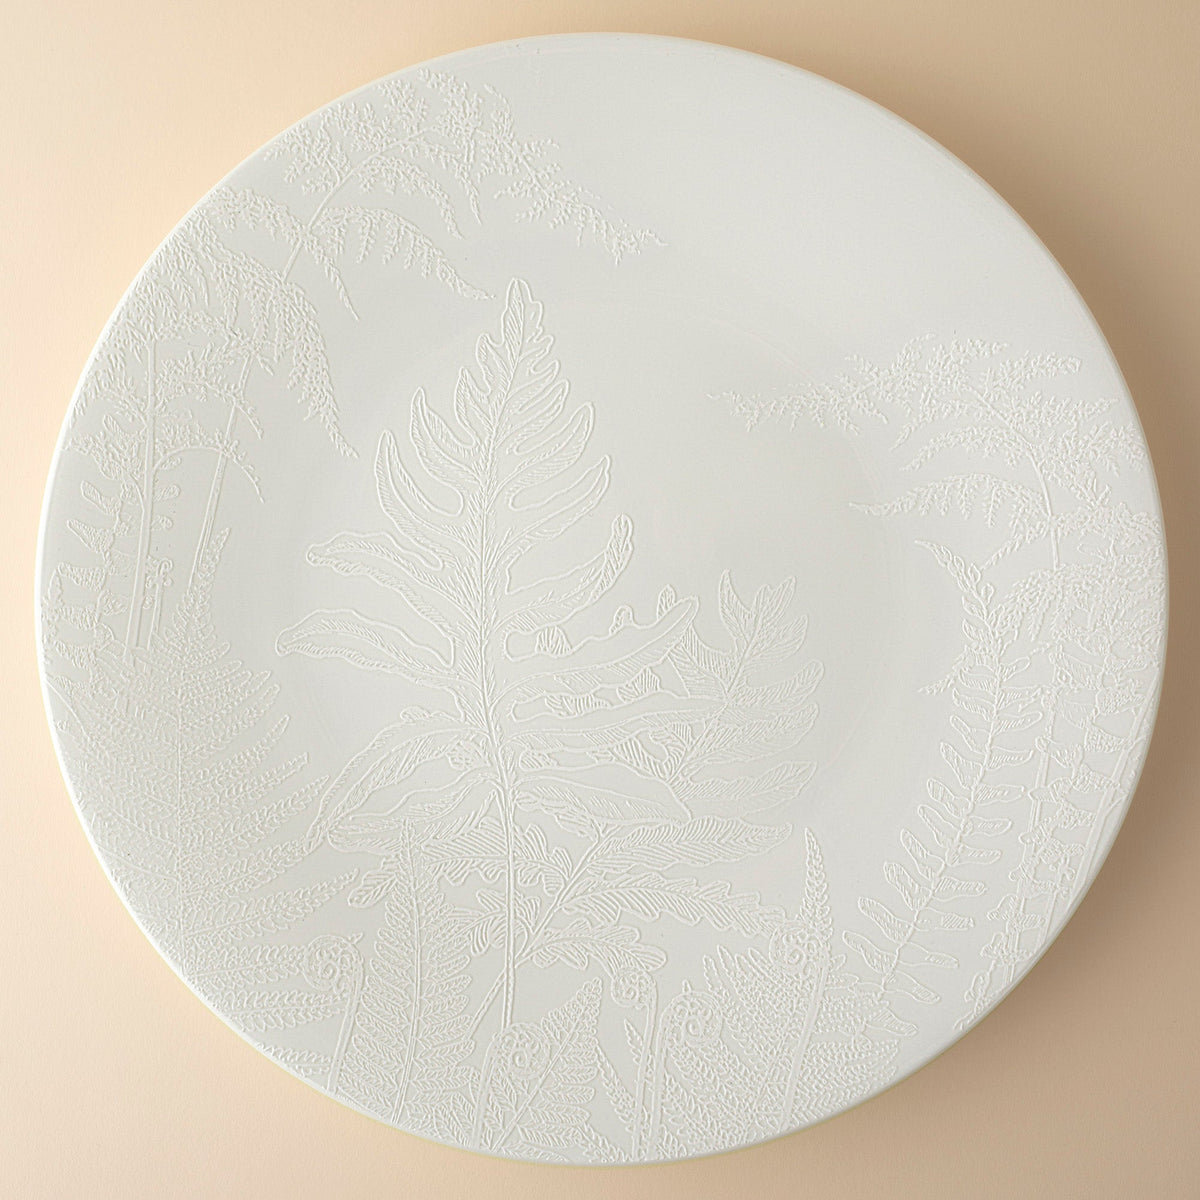 A porcelain Spring Coupe Platter by Caskata with a pattern of leaves on it, perfect for a spring table setting.